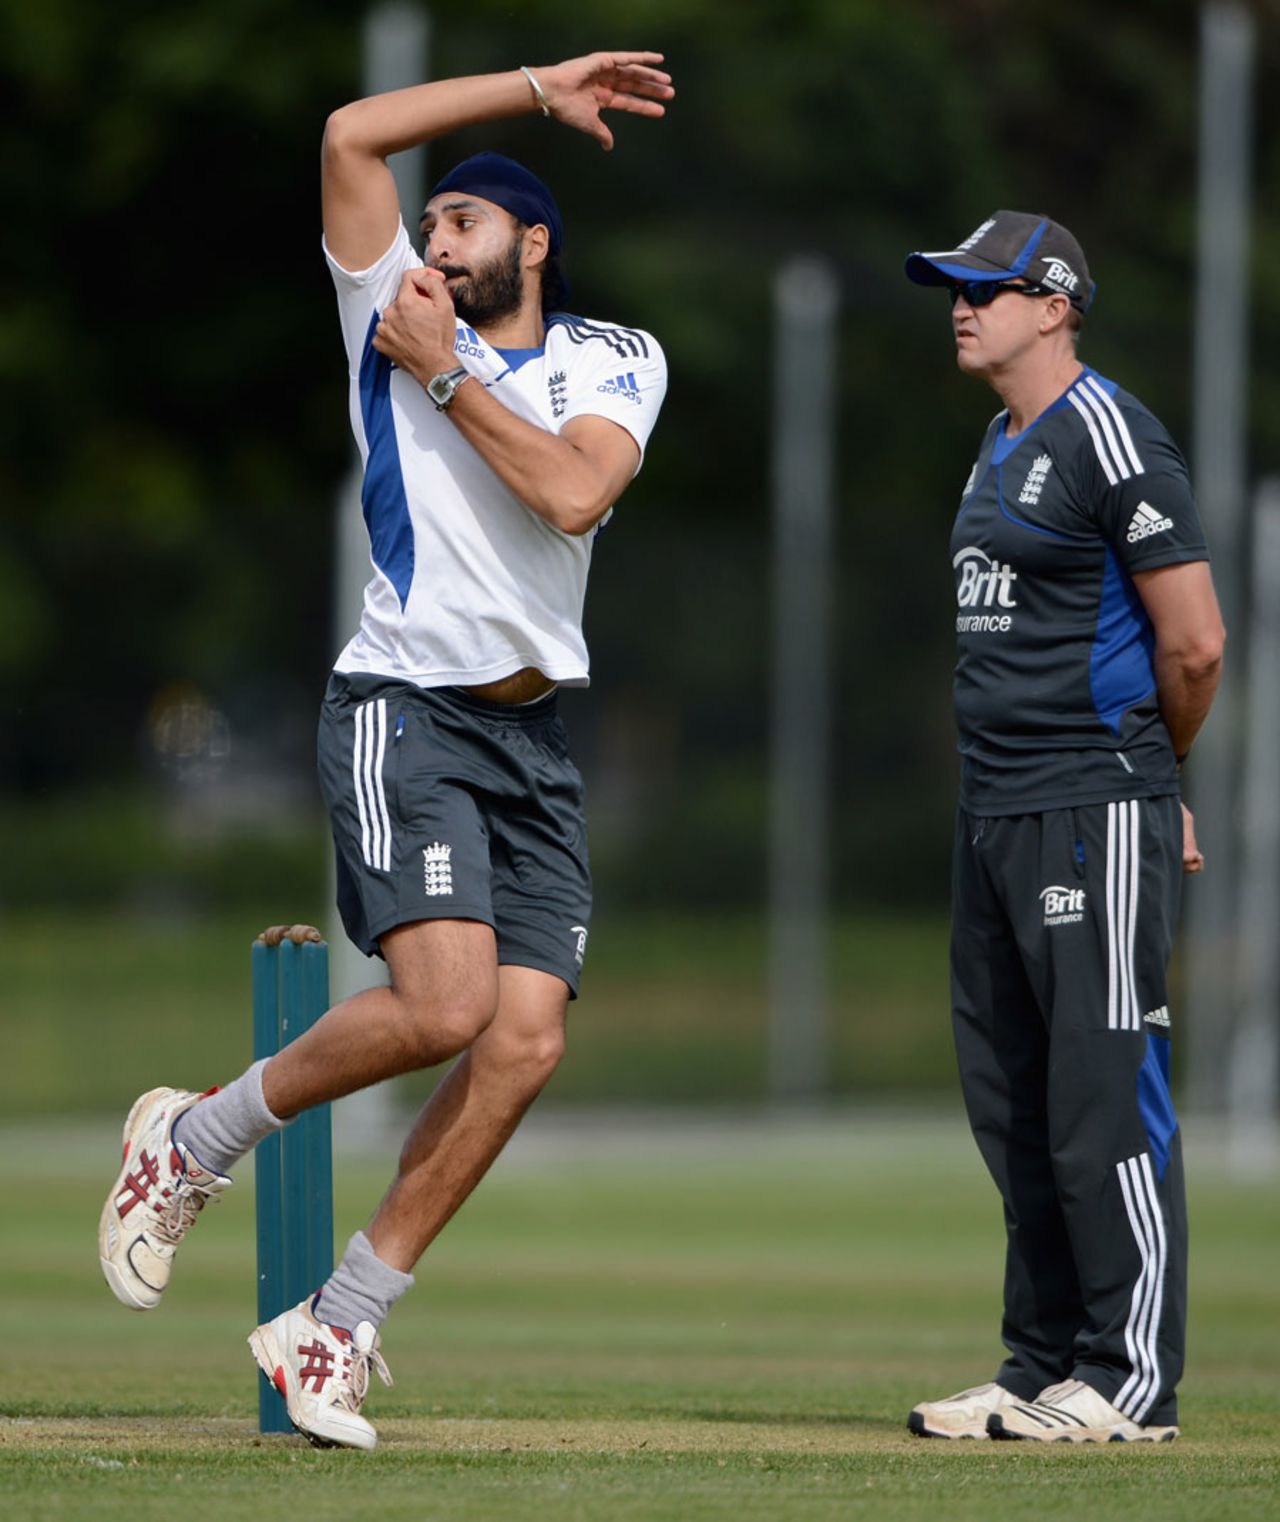 Monty Panesar and Andy Flower at a practice session in Queenstown, New Zealand, New Zealand XI v England XI, Tour game, February 27-March 2, 2013